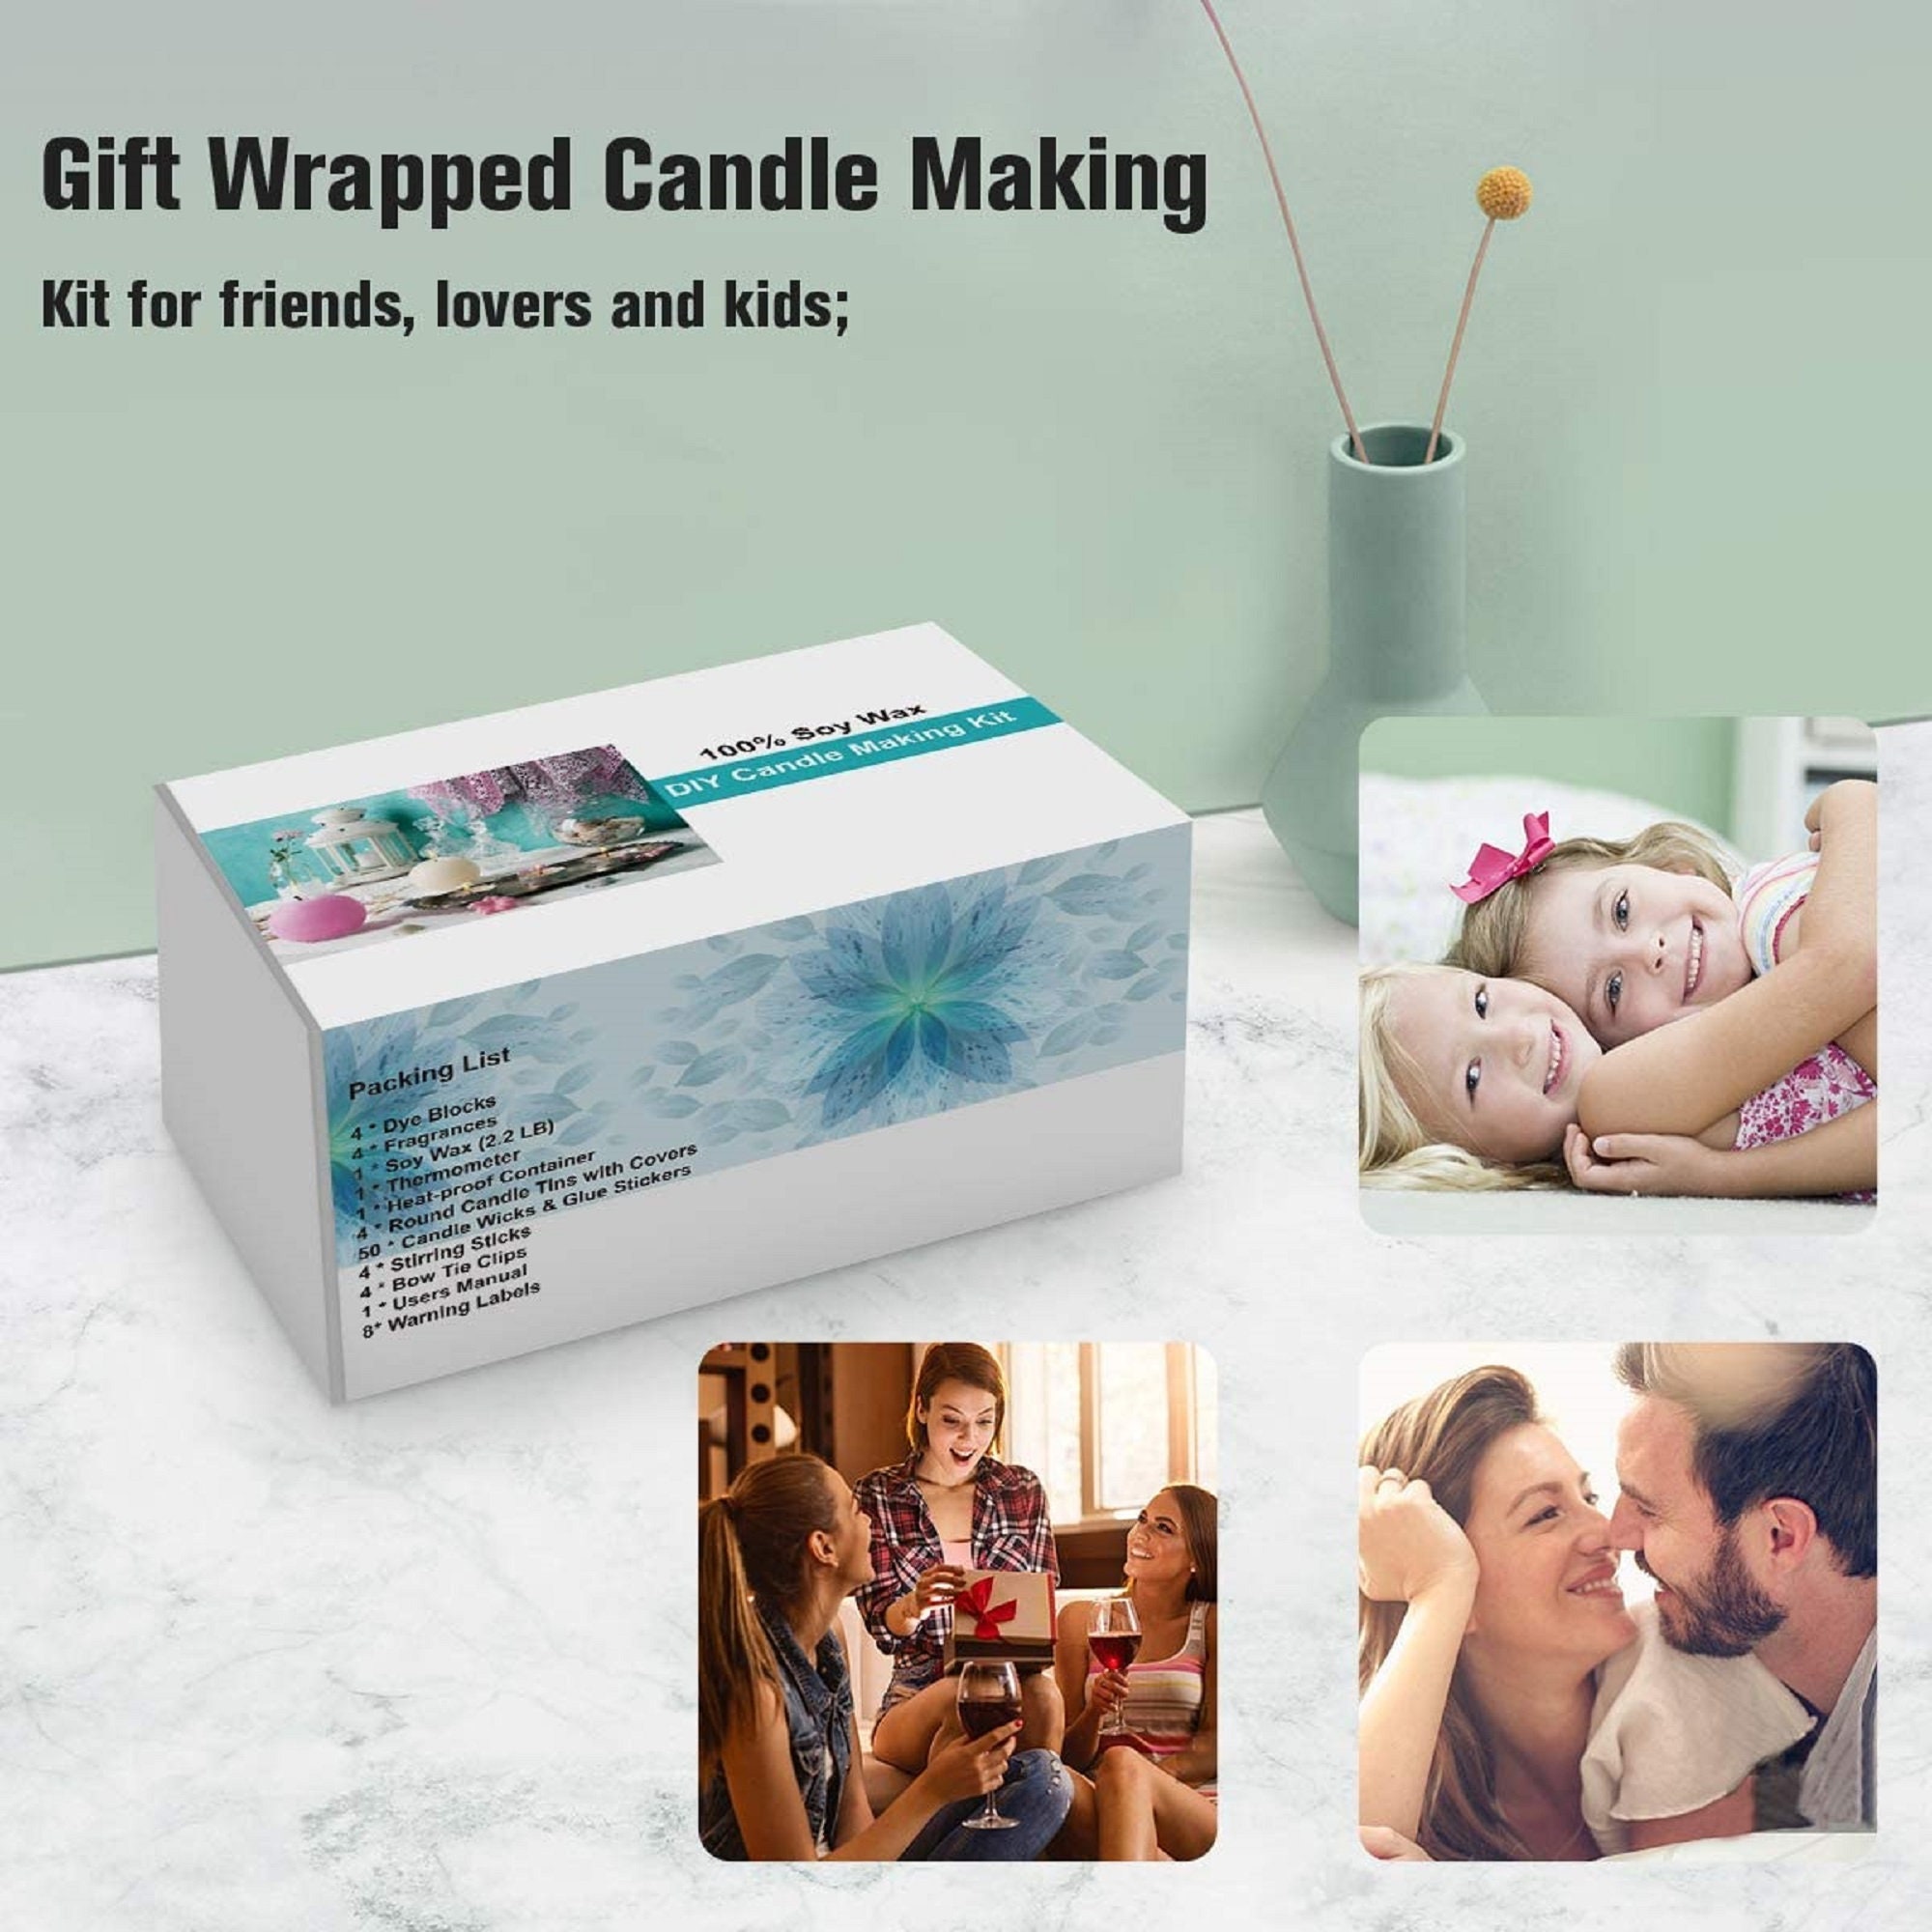 Candle Making Kit for Adults Soy Wax 2.2 LB, 4 Premium Scents, 4candle  Tins, 4 Dye Blocks,heat Proof Container,50 Candle Wicks and More 